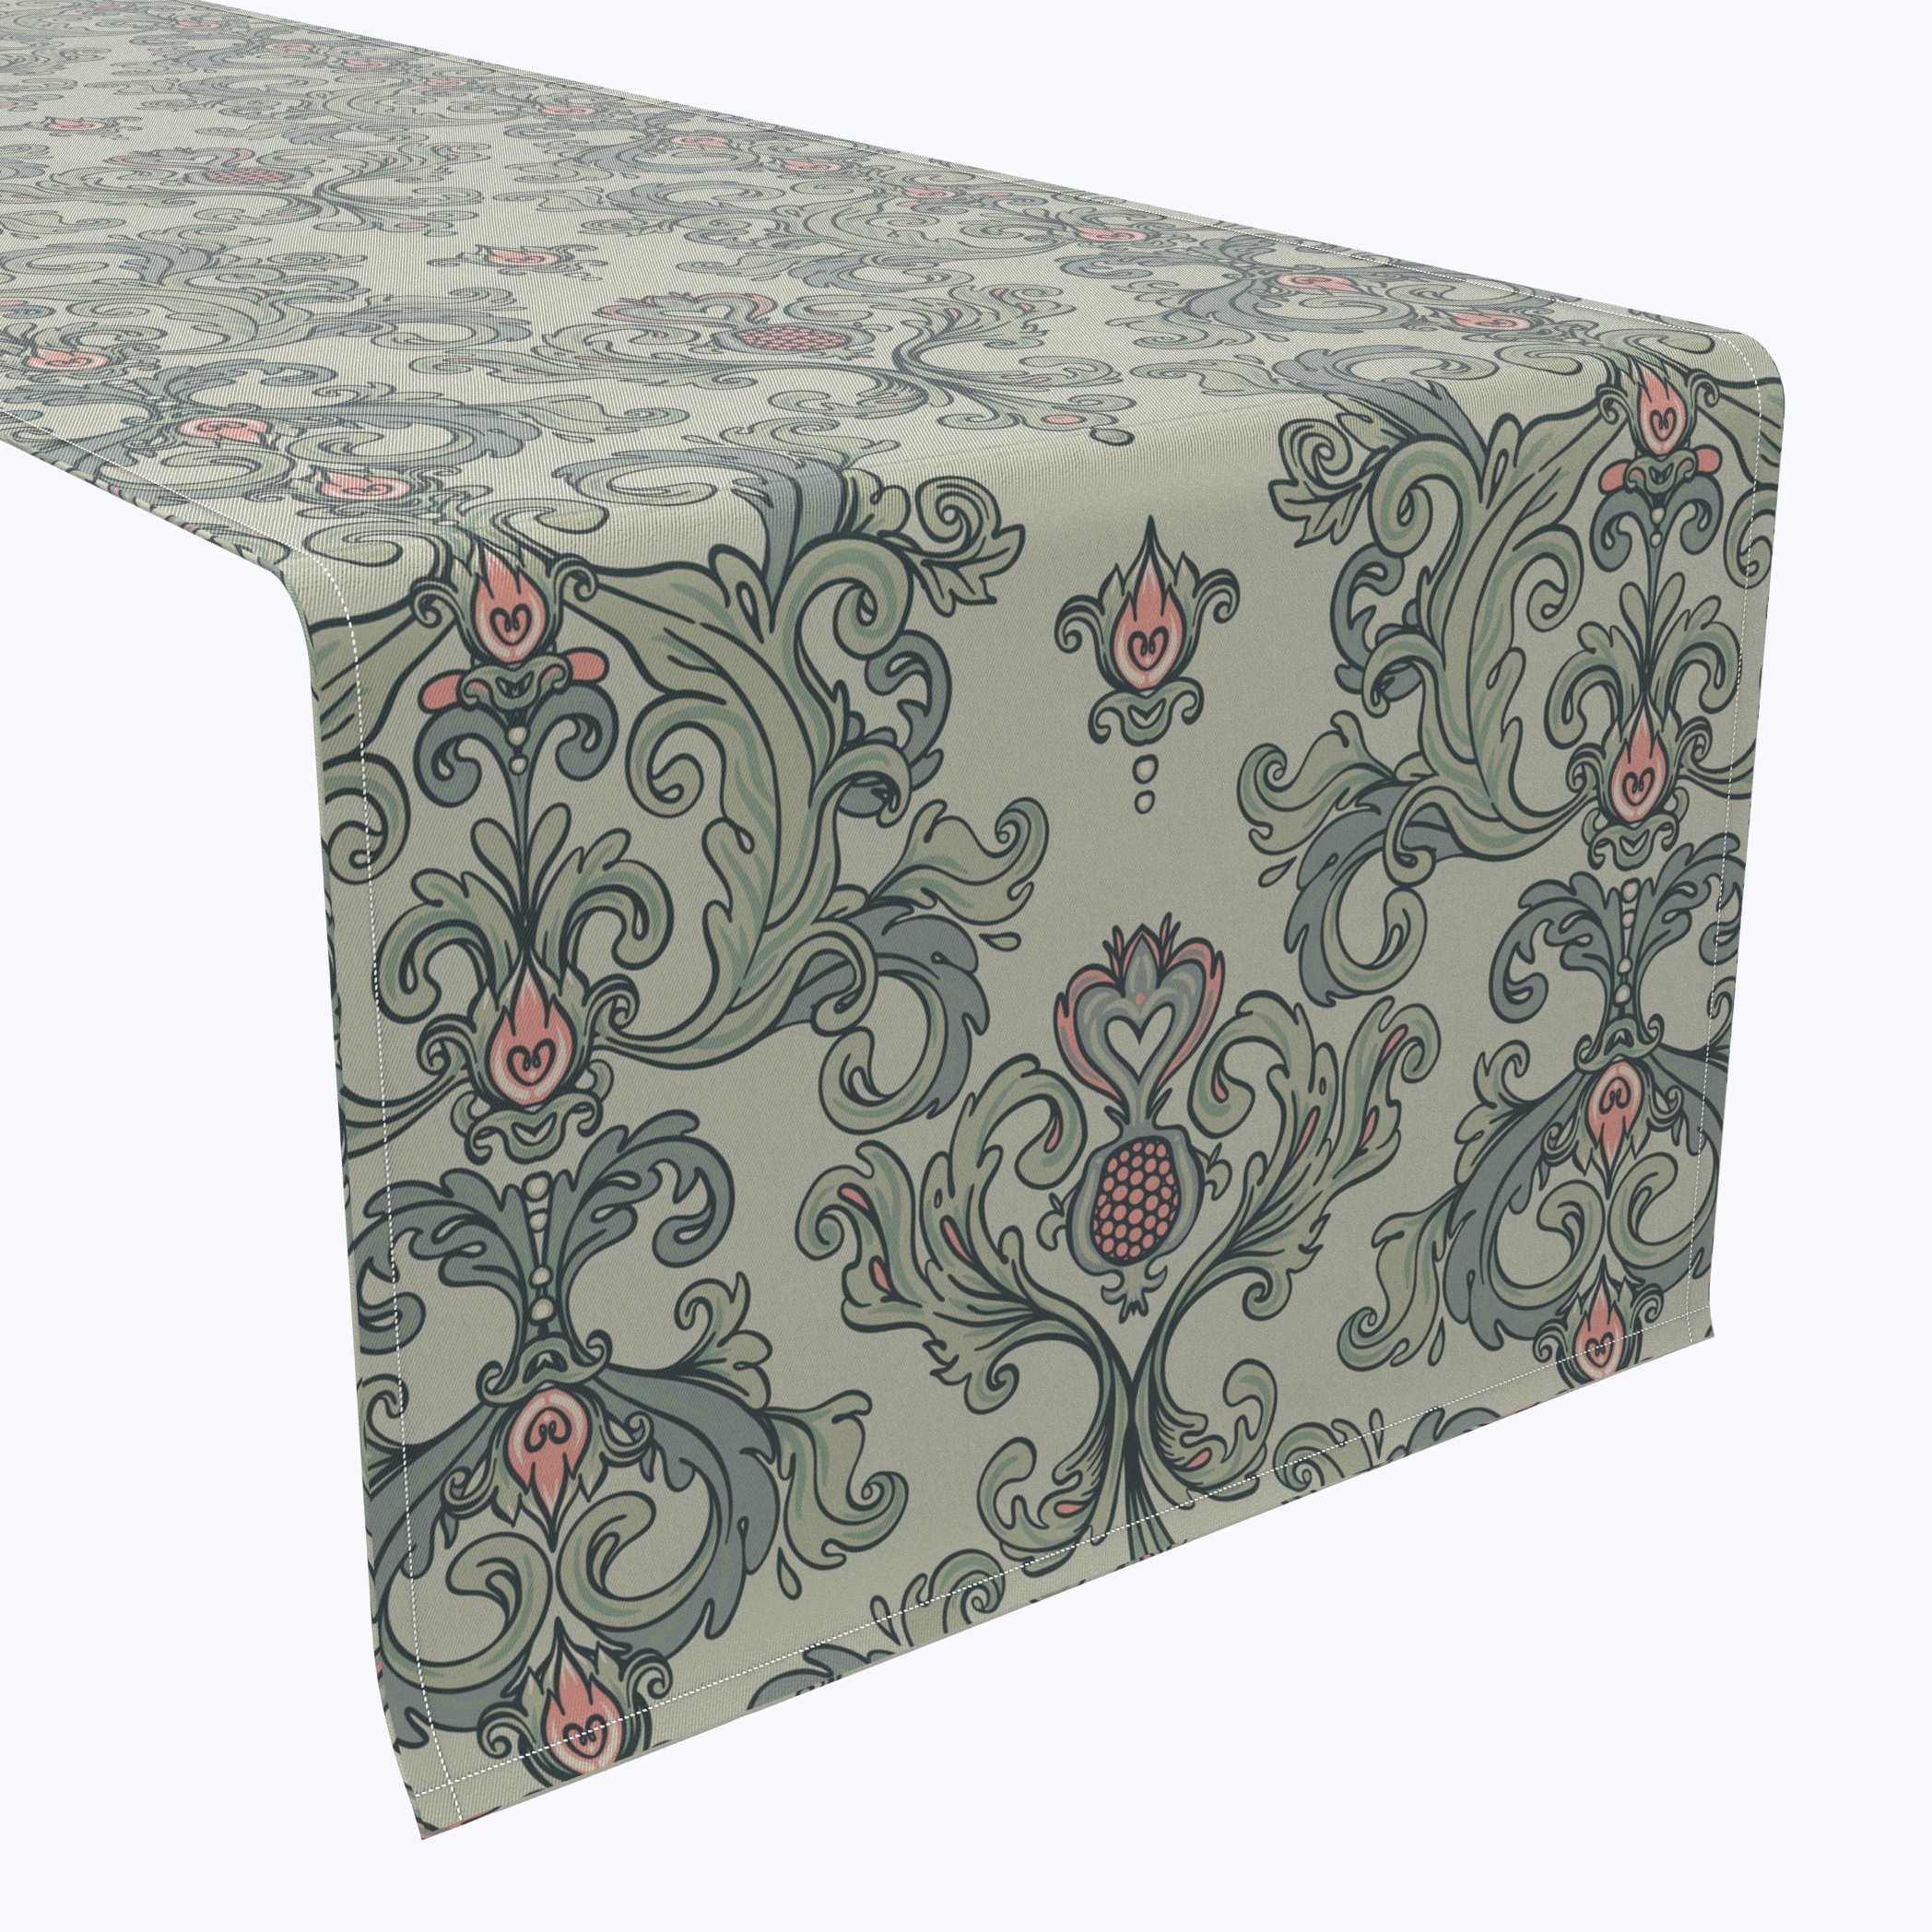 https://ak1.ostkcdn.com/images/products/is/images/direct/47937d6ad438f5a05de644c12b777e5b775e68c9/Fabric-Textile-Products%2C-Inc.-Table-Runner%2C-100%25-Cotton%2C-16x108%22%2C-Floral-11.jpg